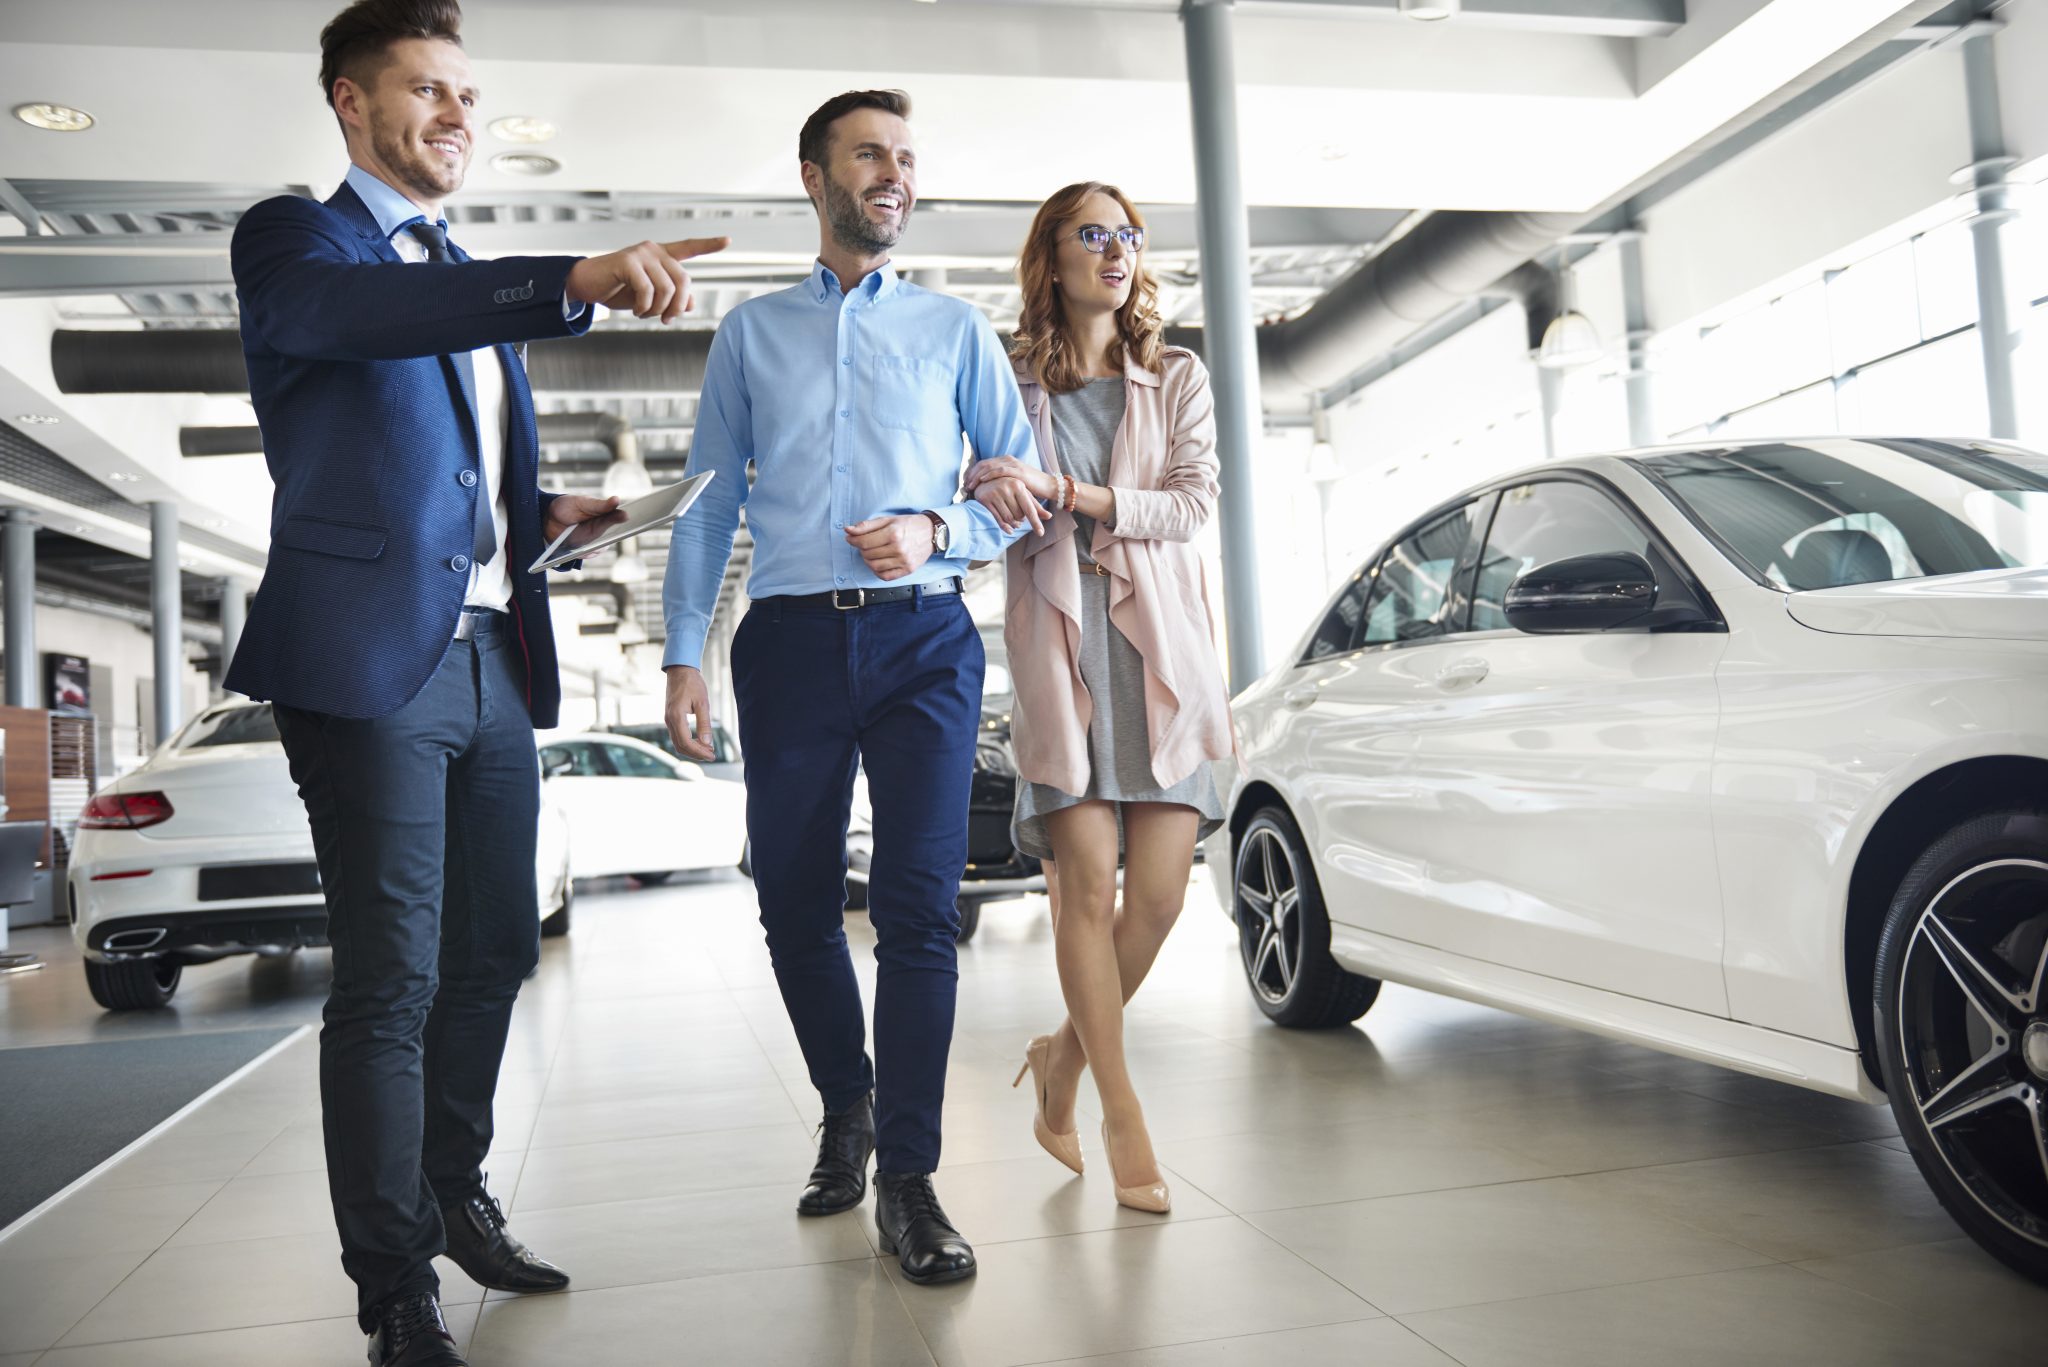 Focusing on Car Loans, leases, and car rentals